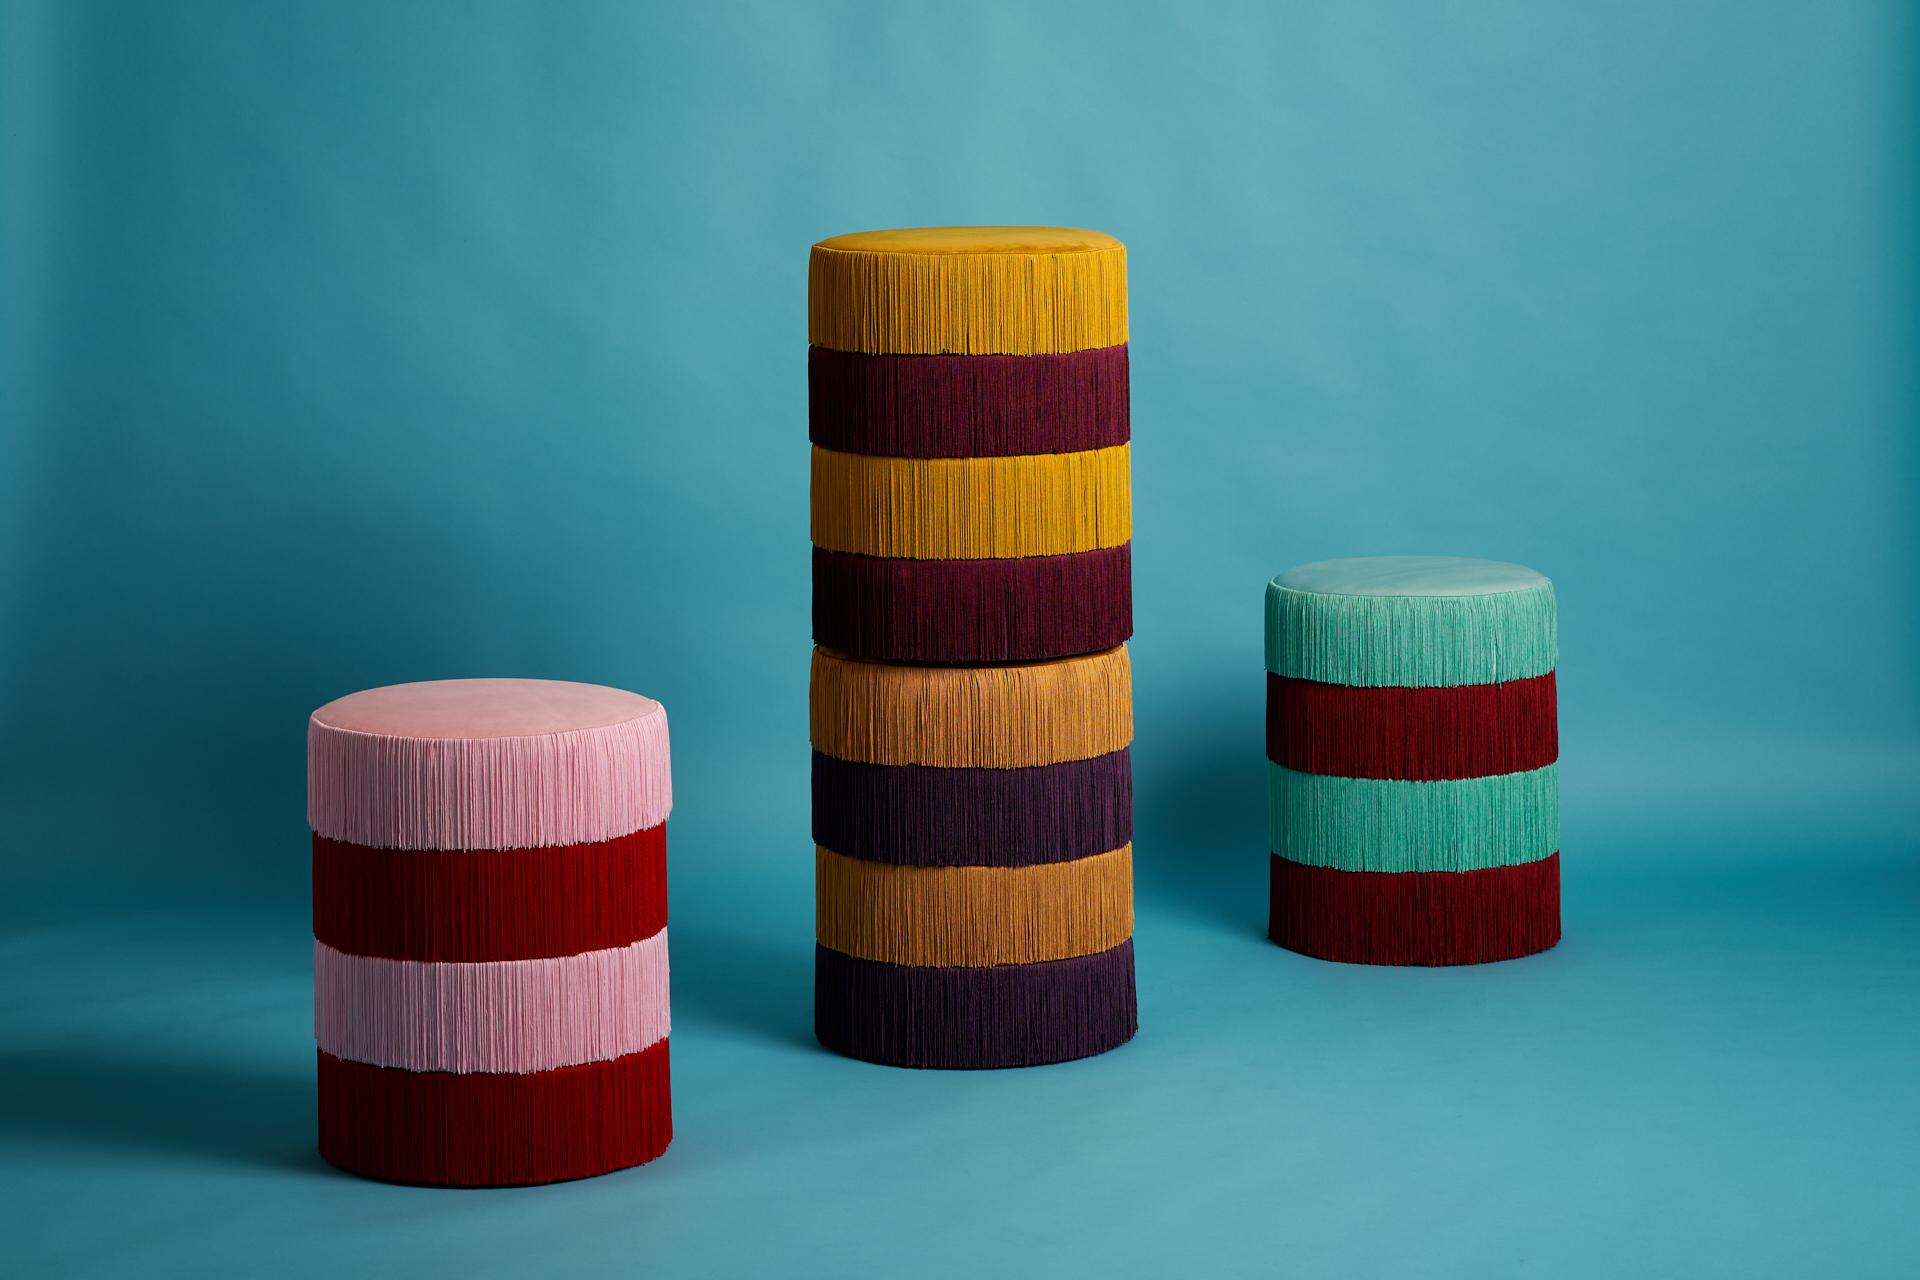 Chachachá pouf by Houtique
Dimensions: H 45 x D 35 cm
Materials: Velvet upholstery, Wood

Art Deco style pouf with wood structure and velvet fabric. 4 modules connected by wooden sleepers, each one Formed by 2 fiber-board discs of 16mm, joined